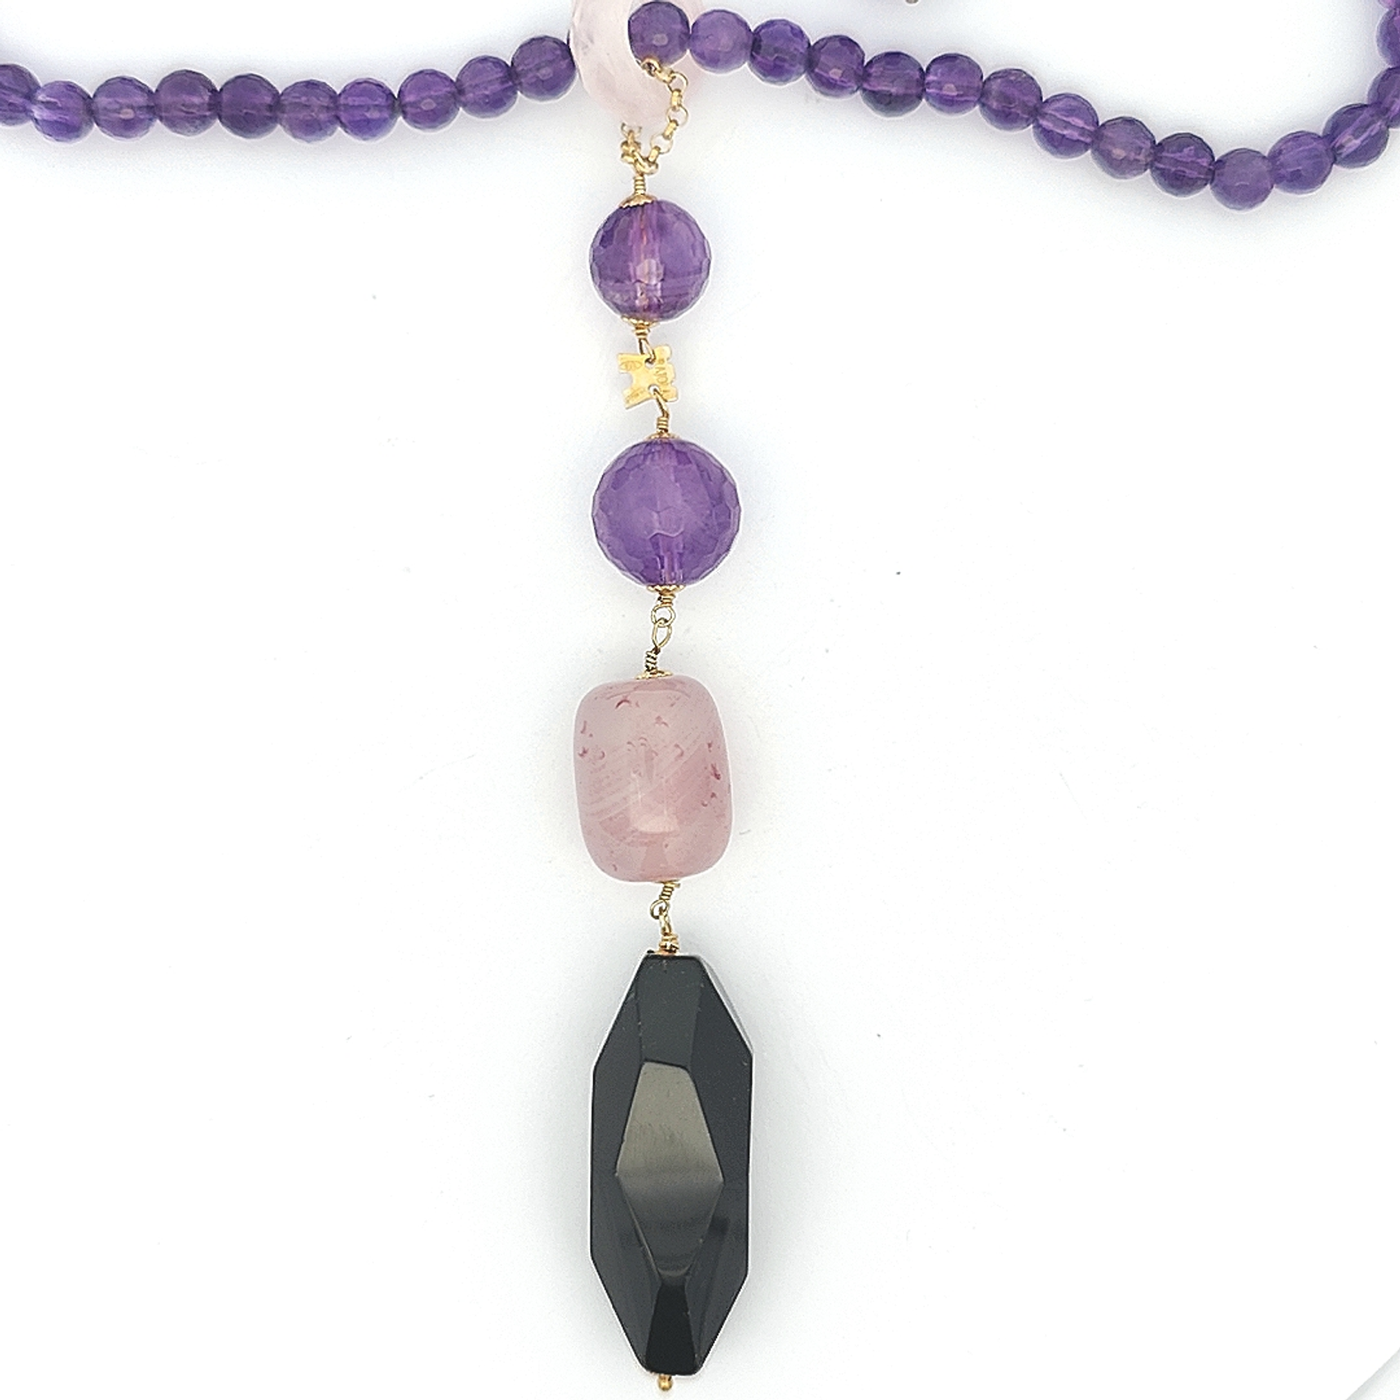 Amethyst and Agate Necklace - Lara - boothandbooth